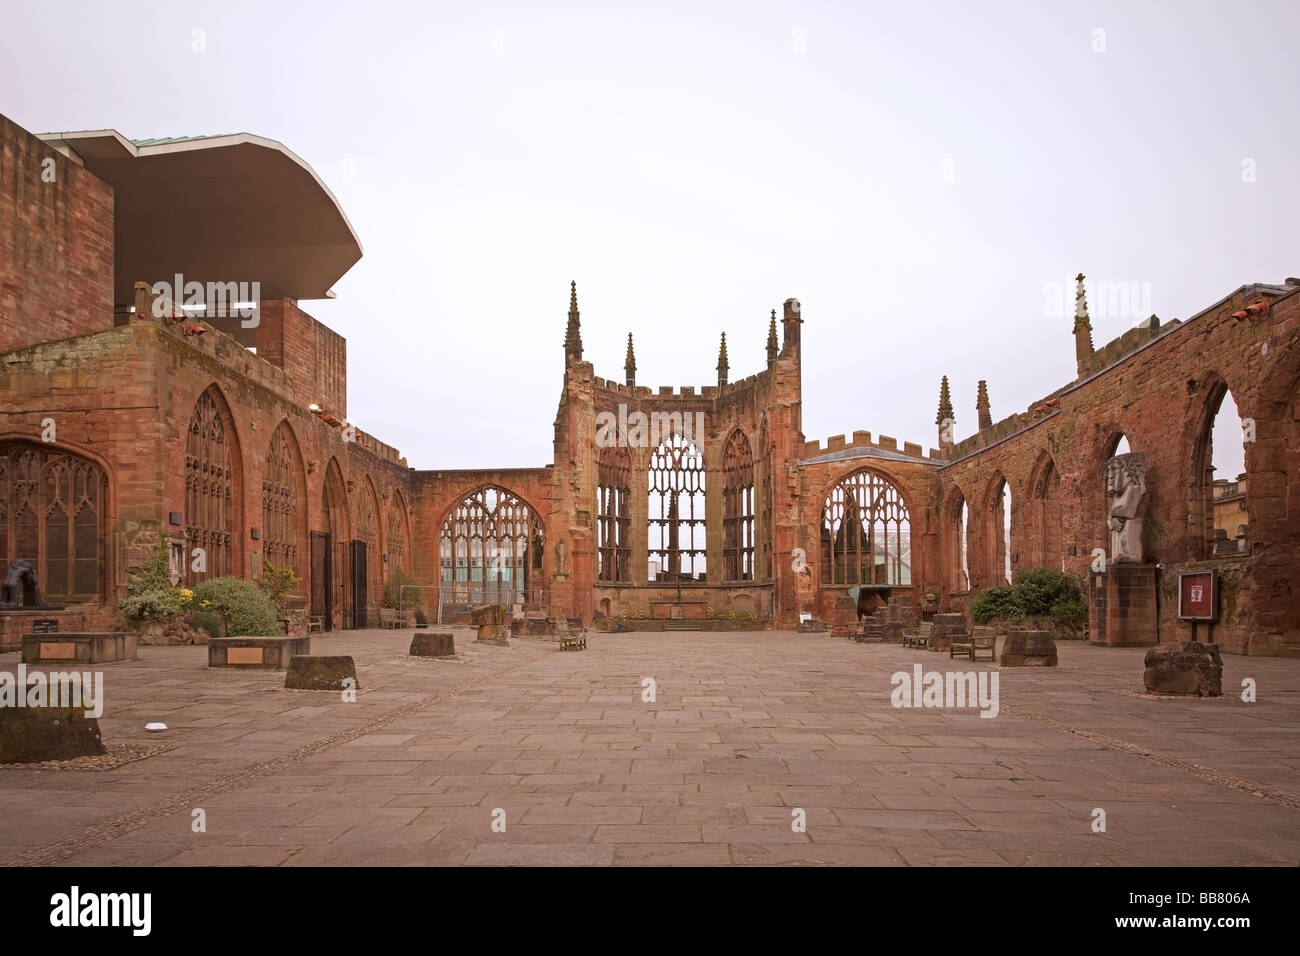 Ruins of Coventry Cathedral in Coventry, Warwickshire, Midlands England, United Kingdom Stock Photo